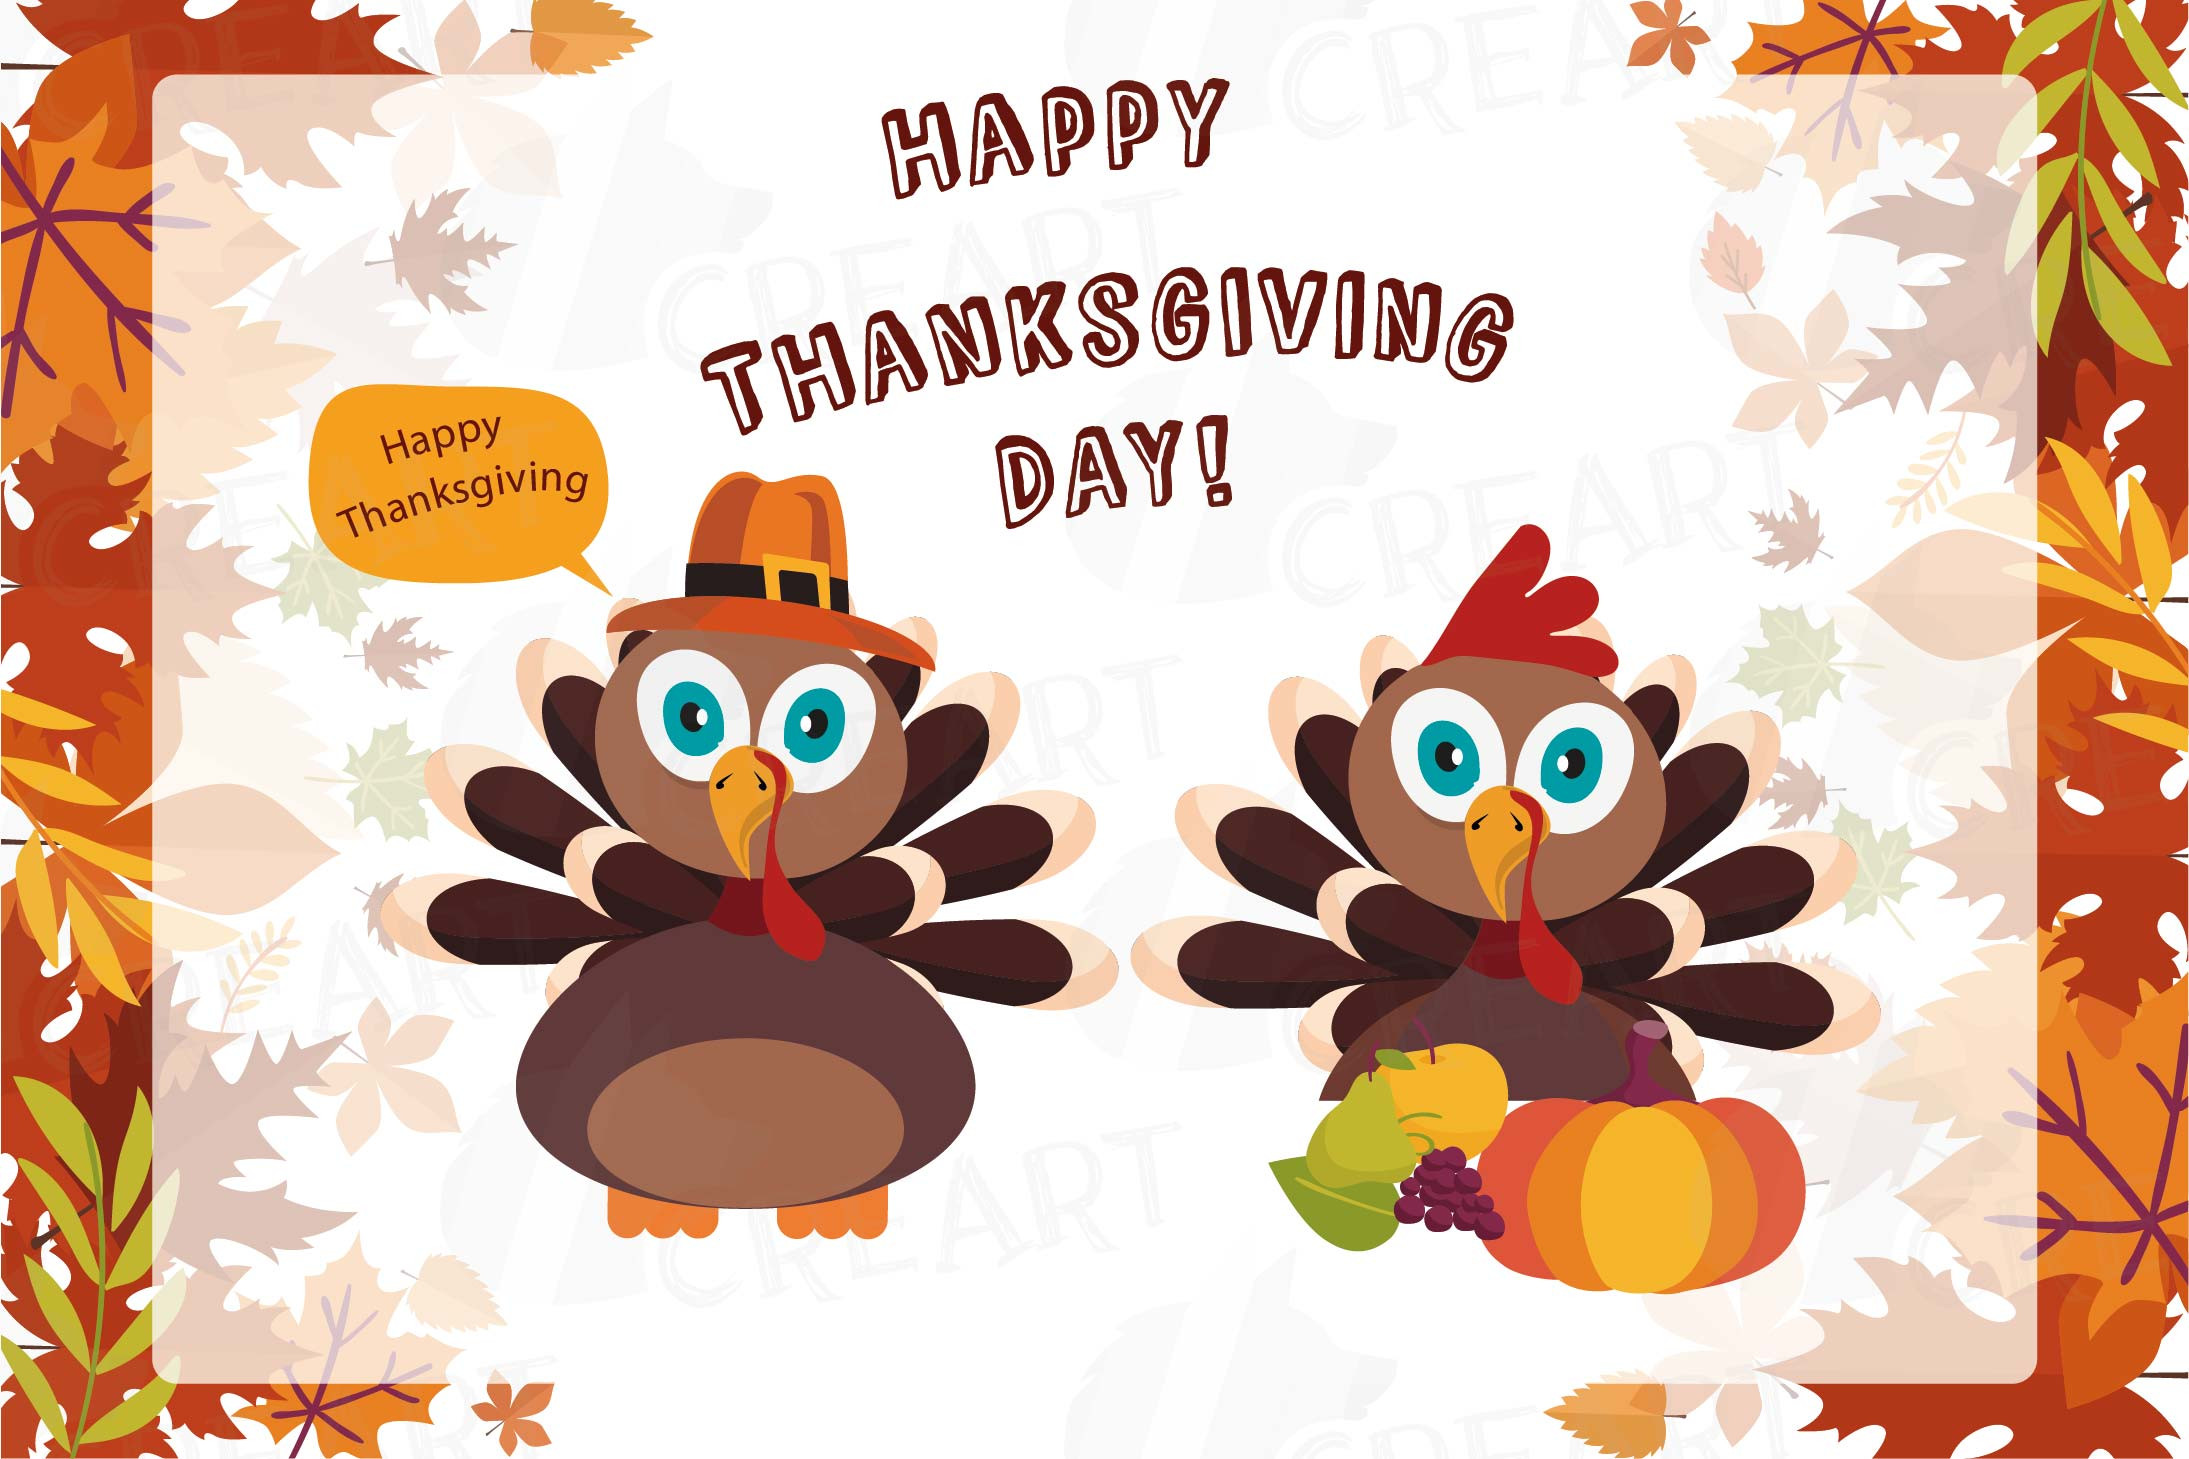 Happy Thanksgiving Turkey
 Colorful Thanksgiving Turkey clip art Happy Thanksgiving